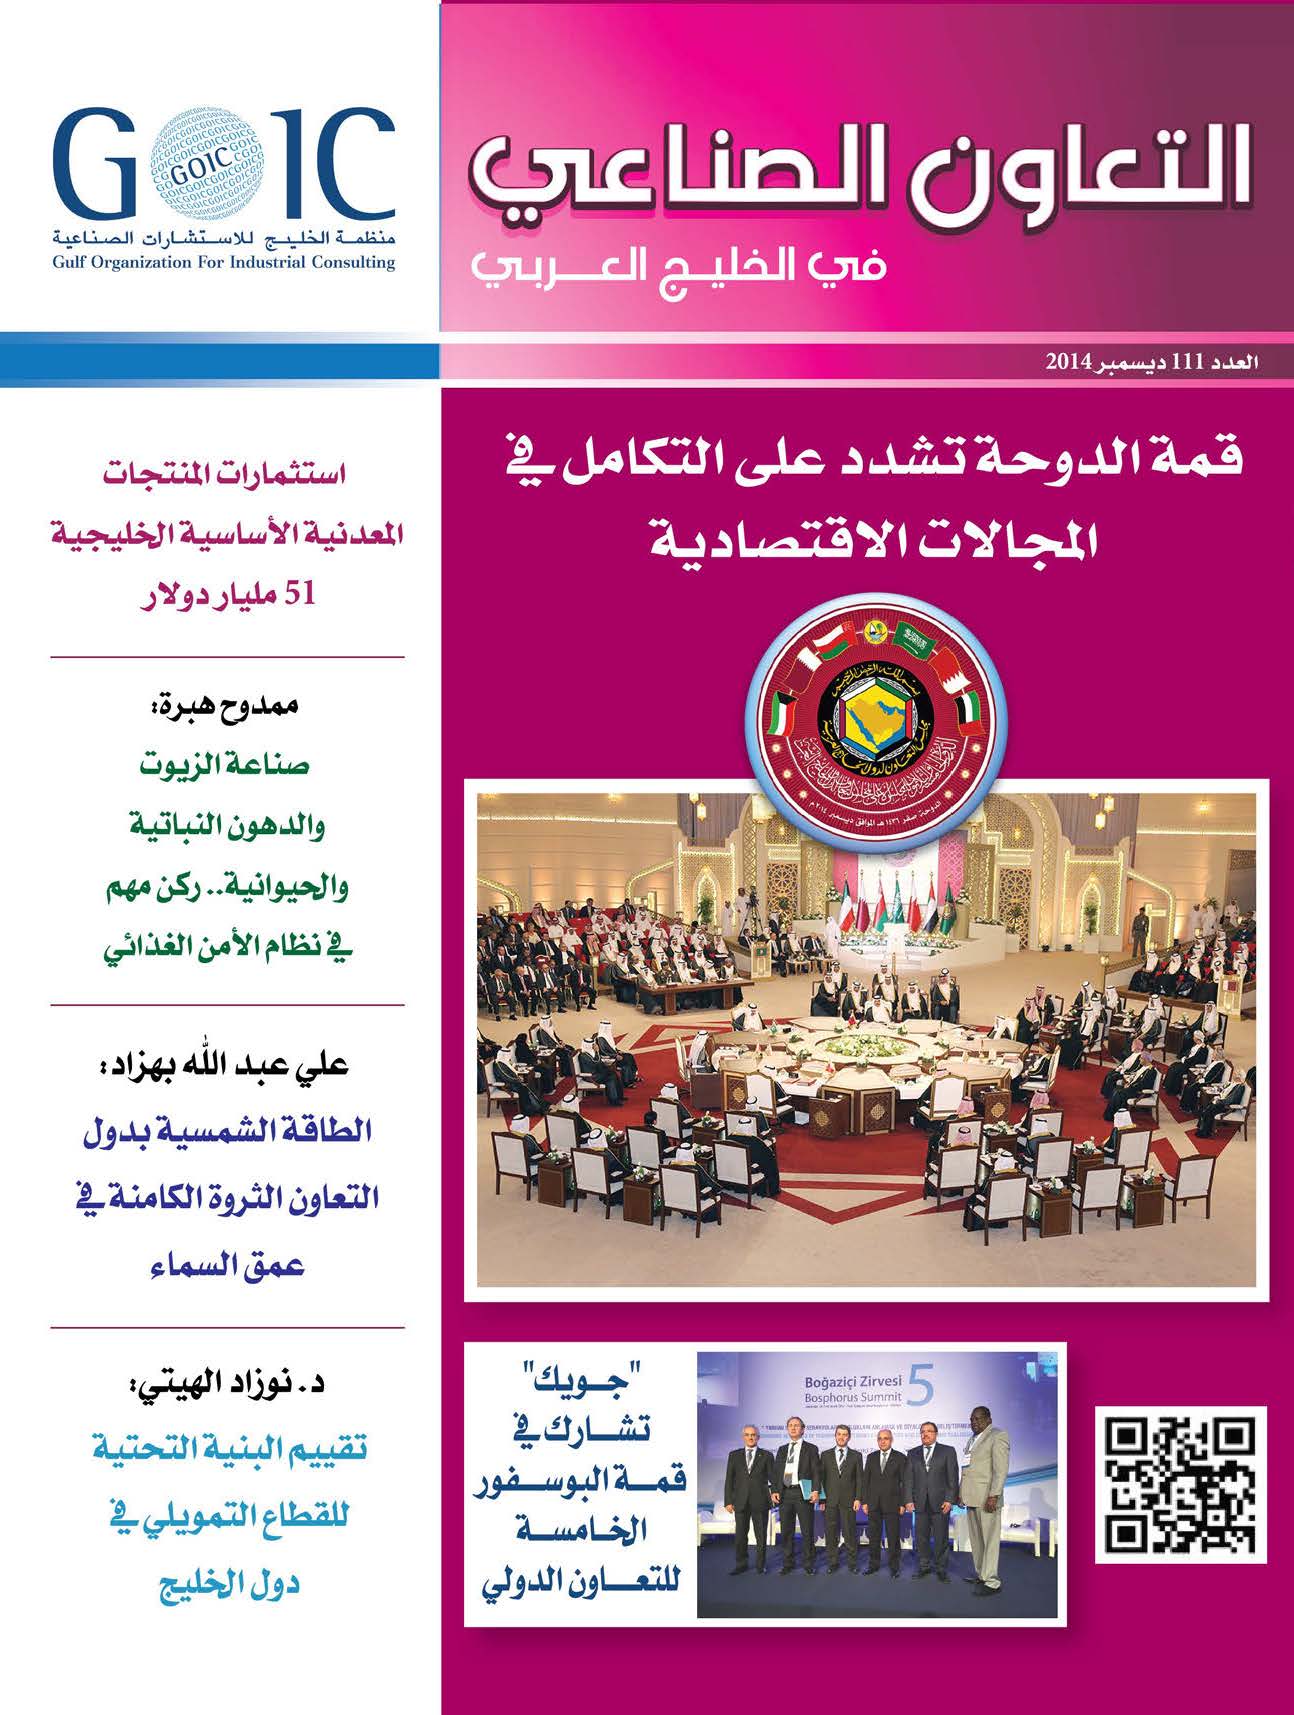 GOIC puts out “The Industrial Cooperation in the Arabian Gulf” Magazine Issue No. 111